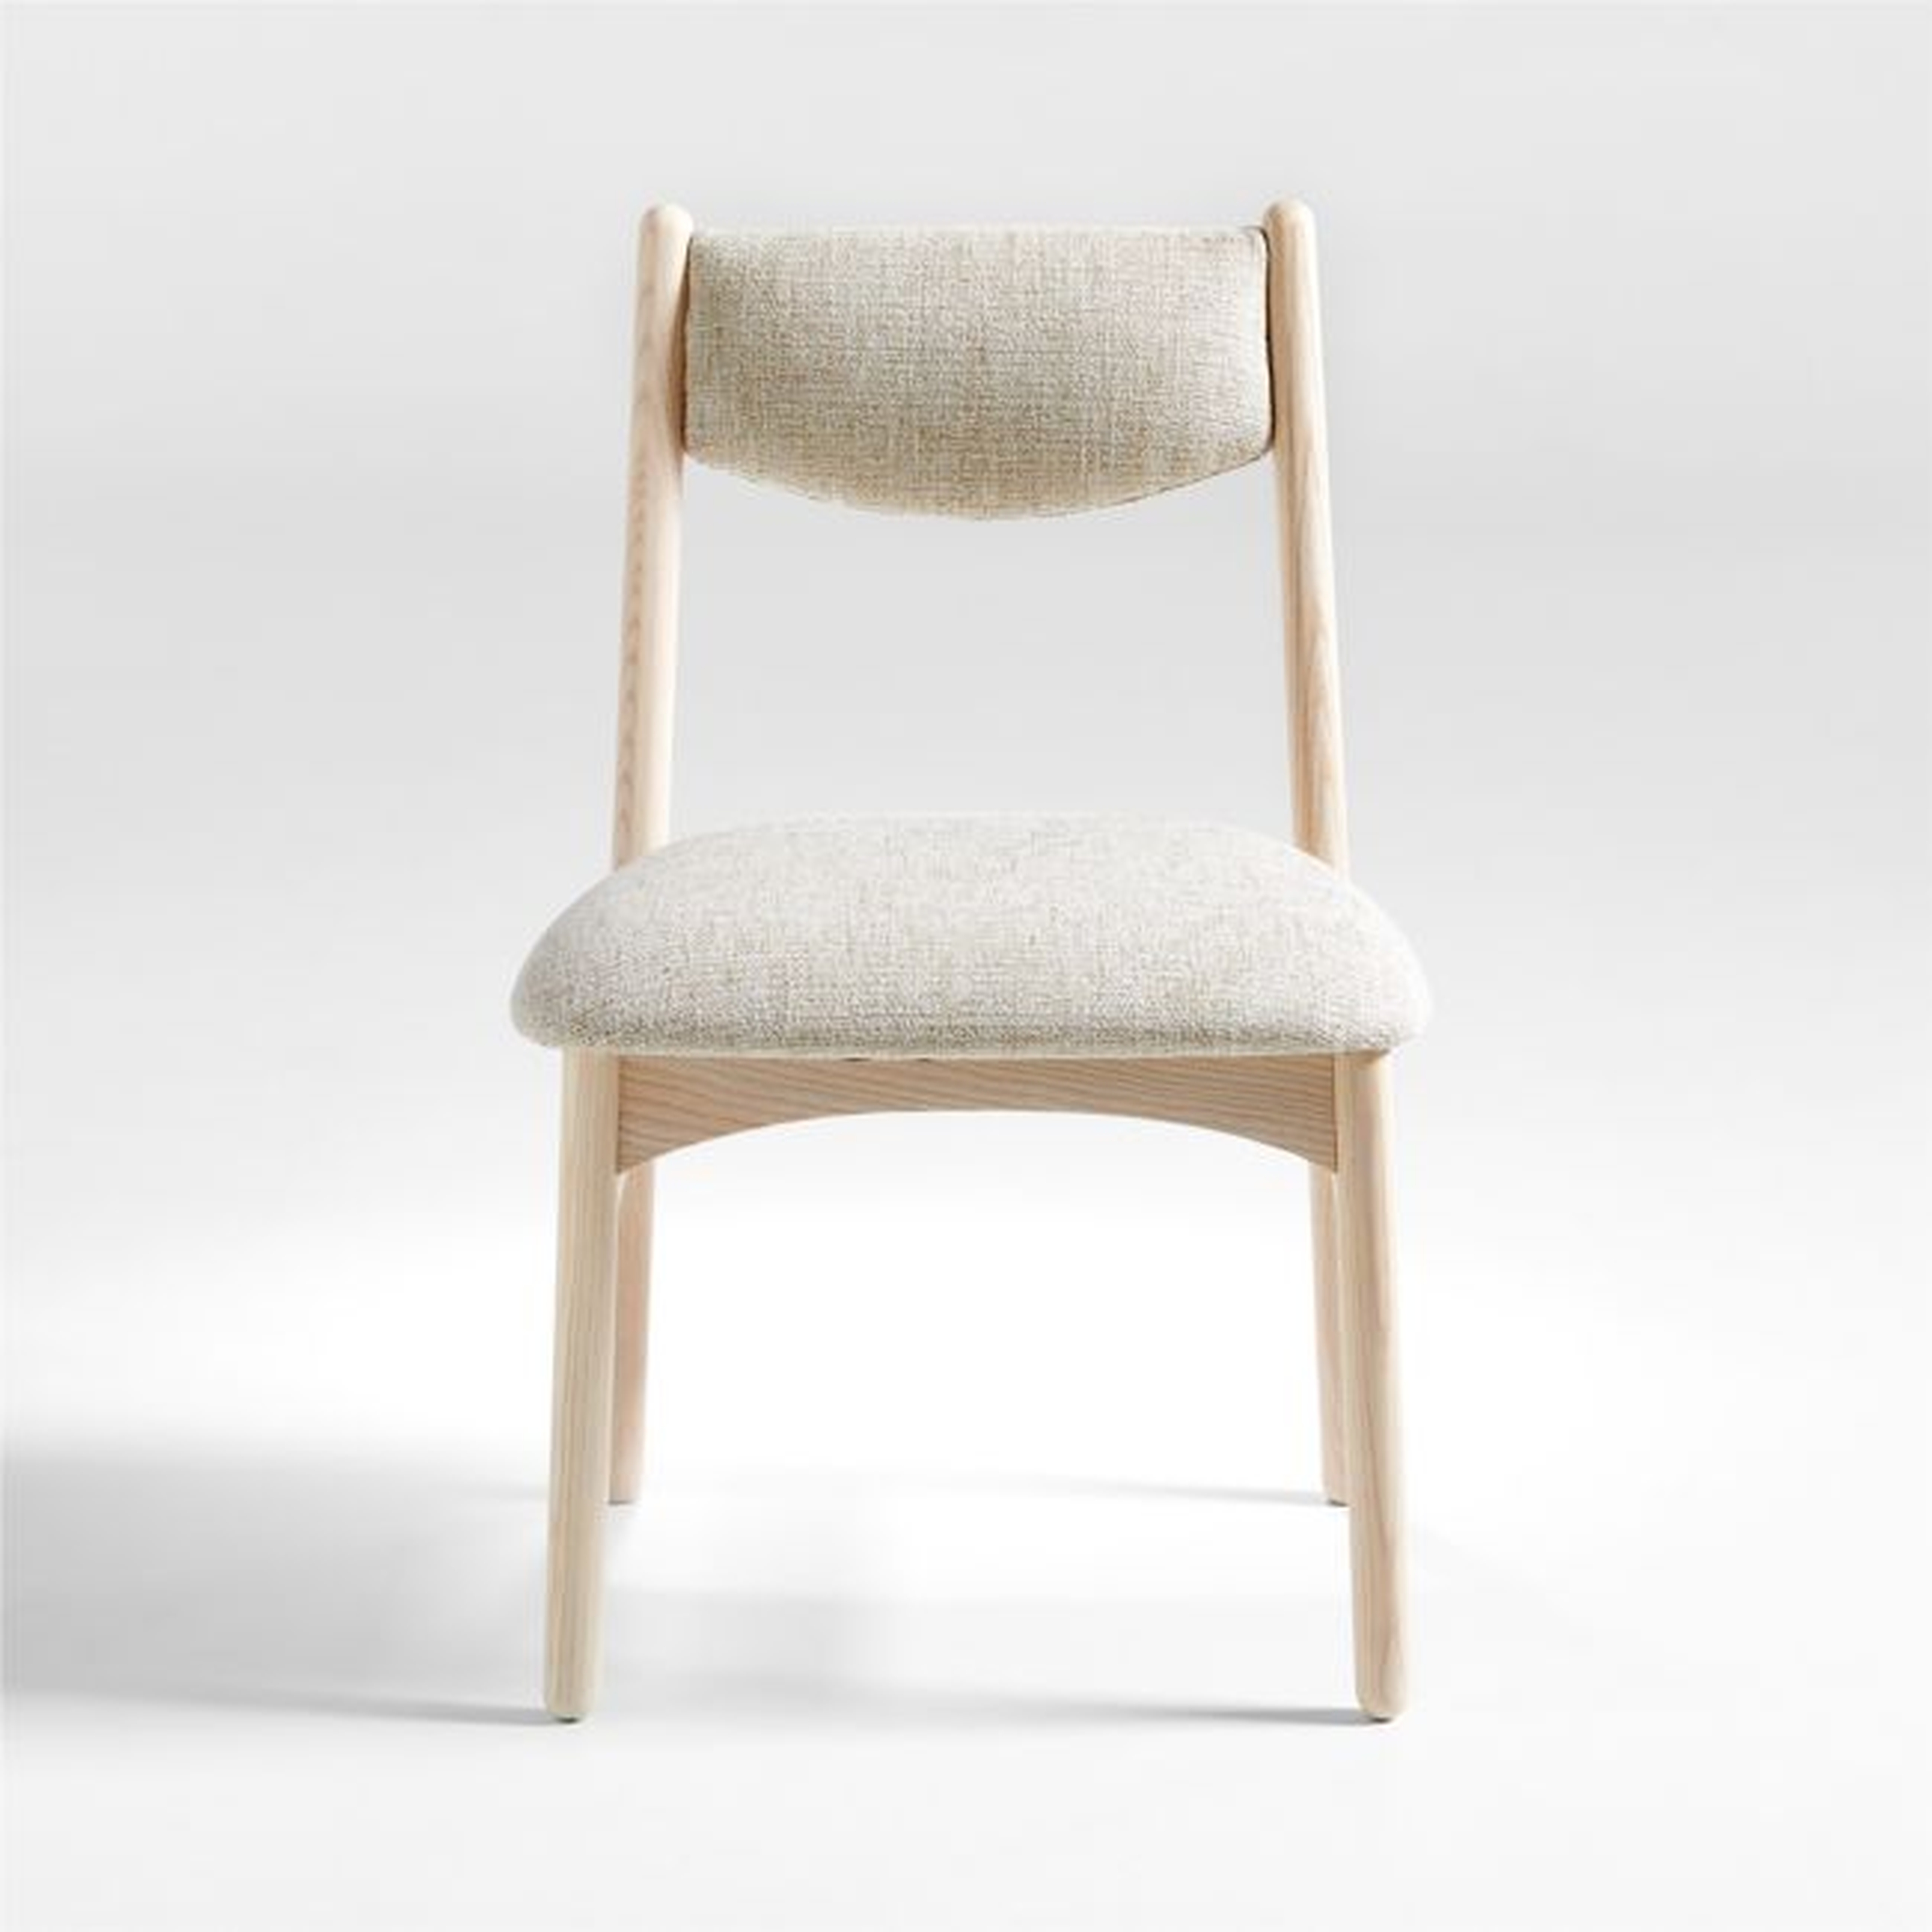 Vaquero Dining Chair - Crate and Barrel